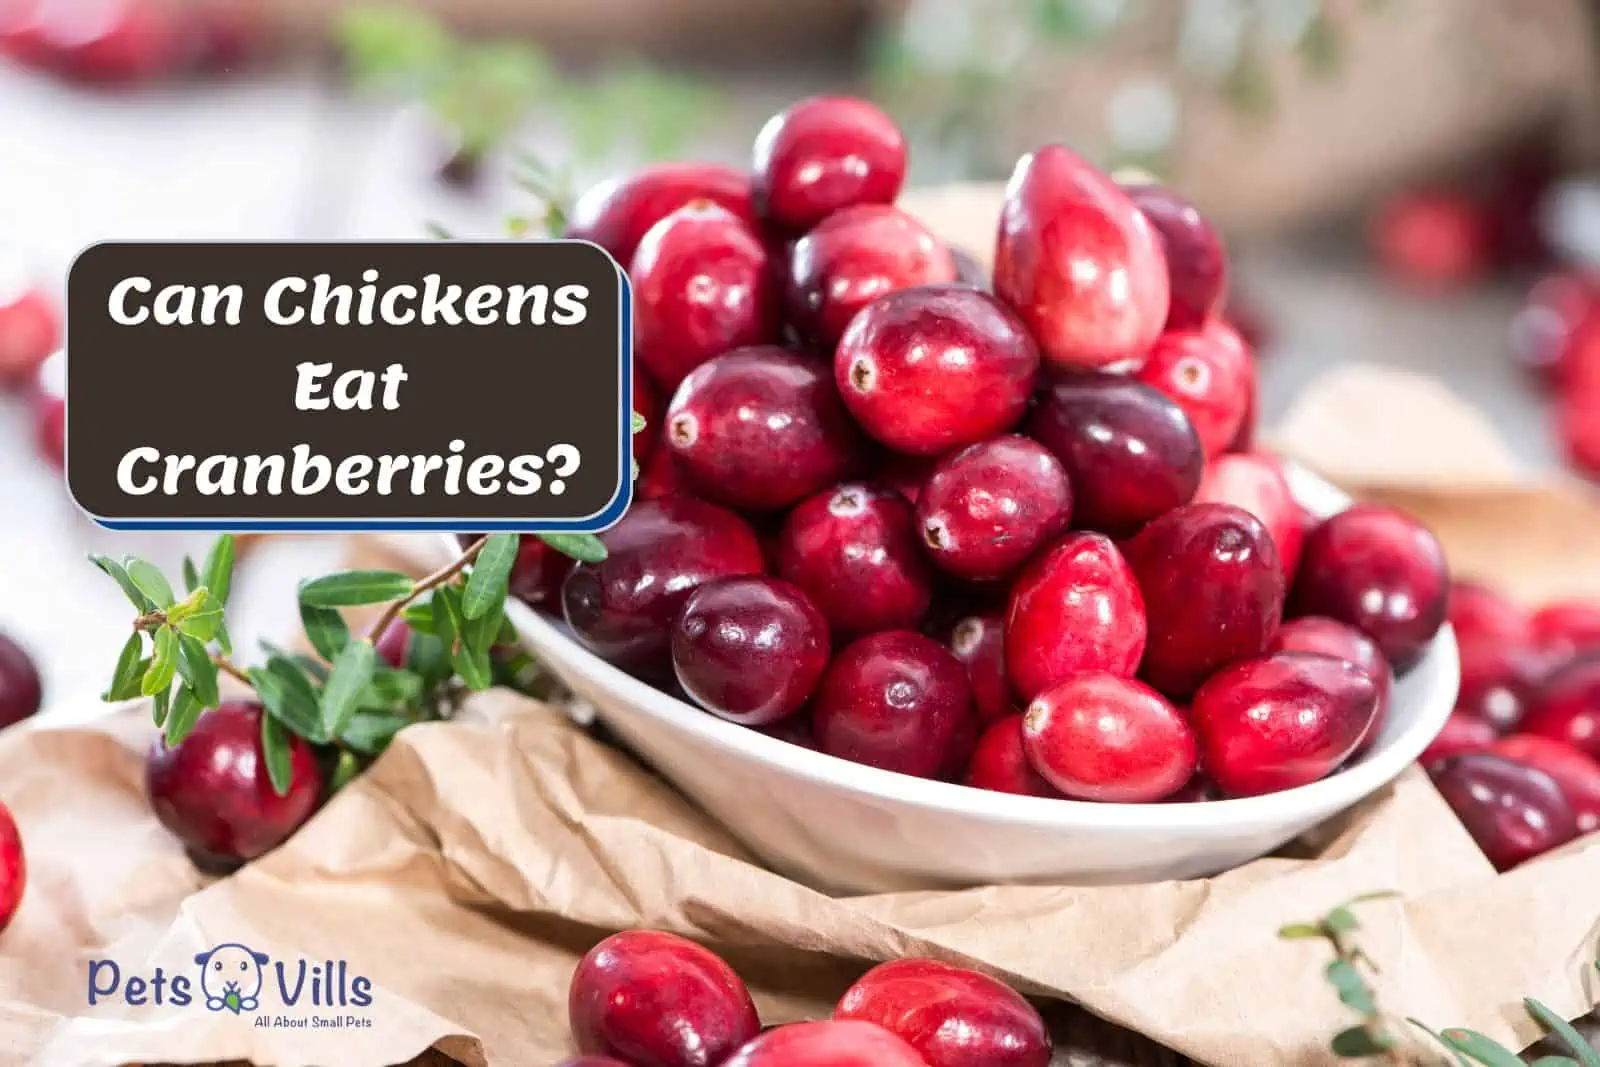 Are cranberries good for chickens